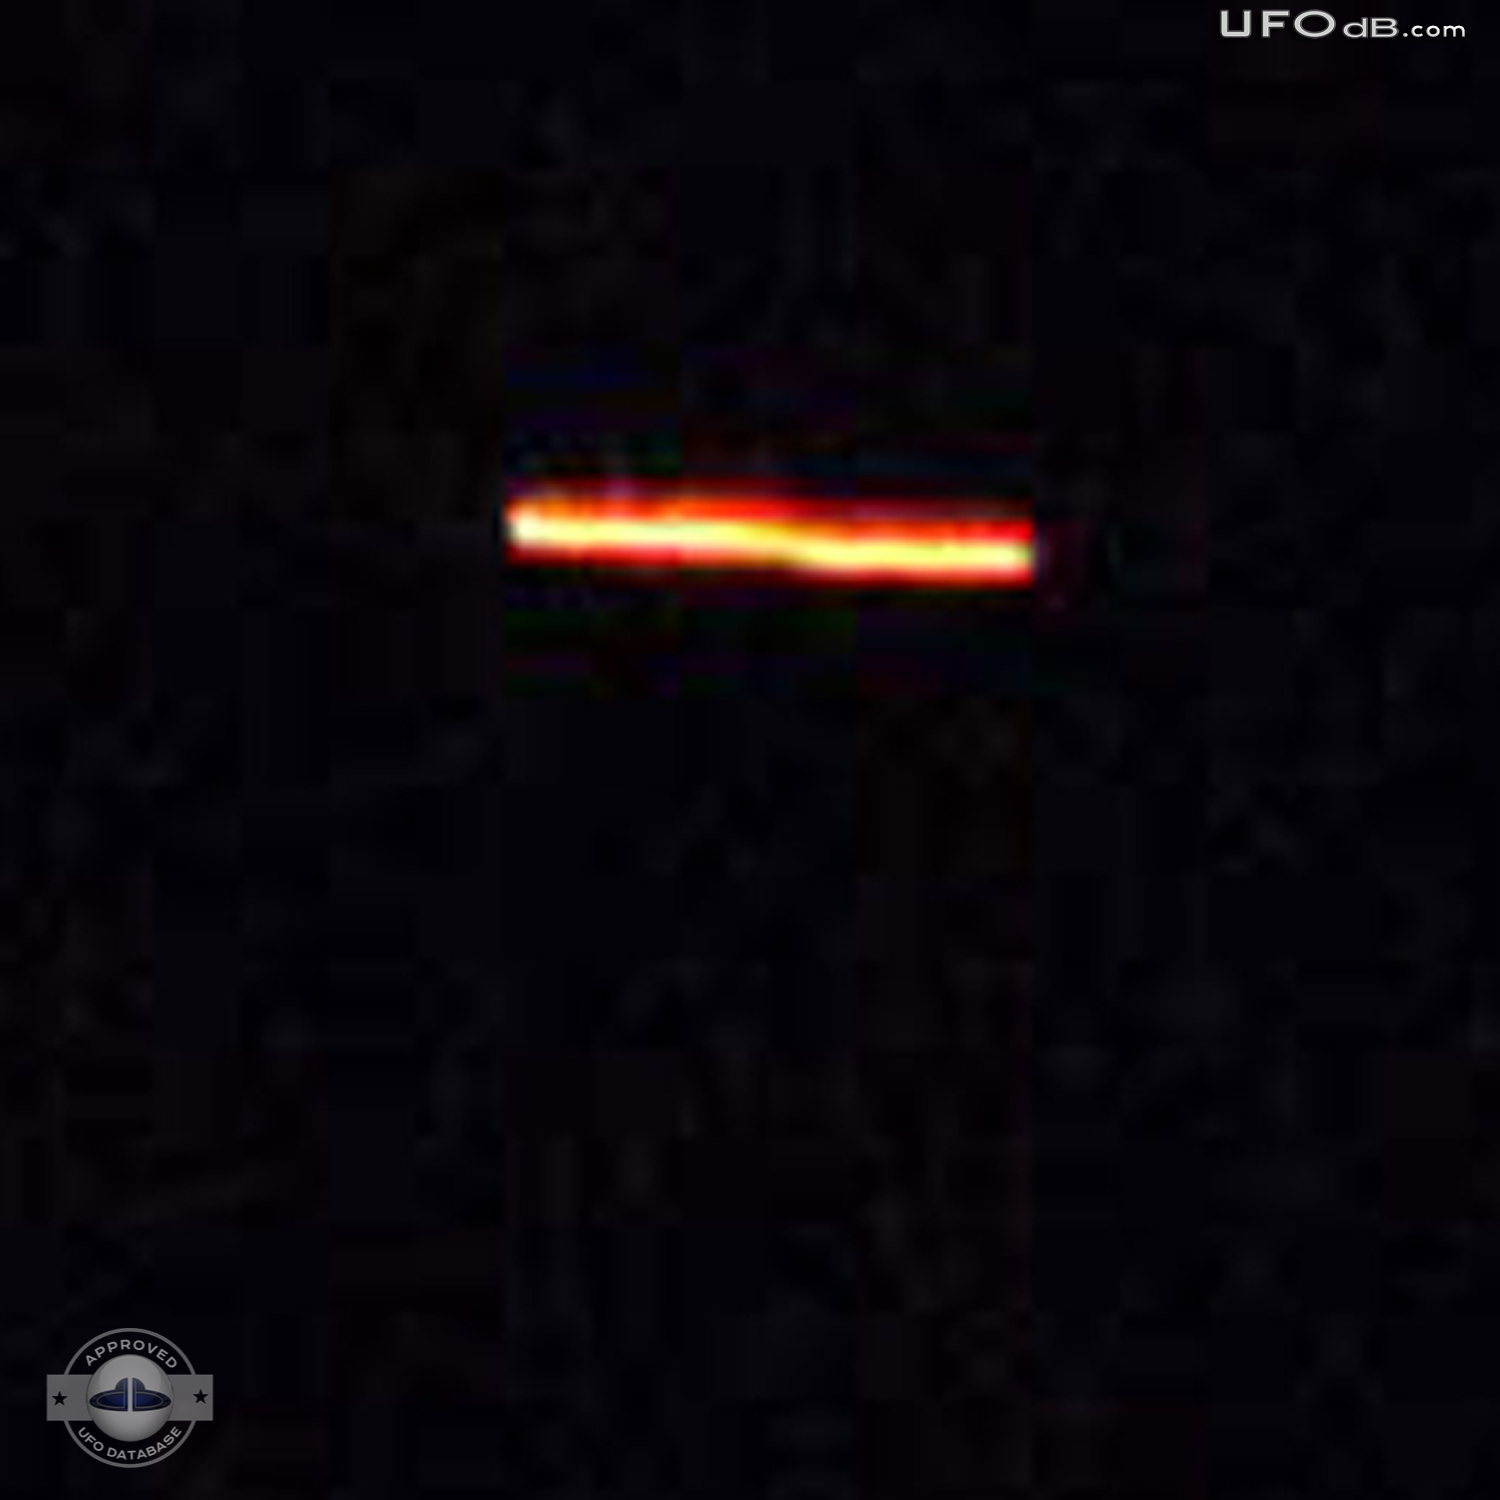 Two orbs UFO over Agimak Lake near Ignace in Ontario Canada, July 2011 UFO Picture #357-2